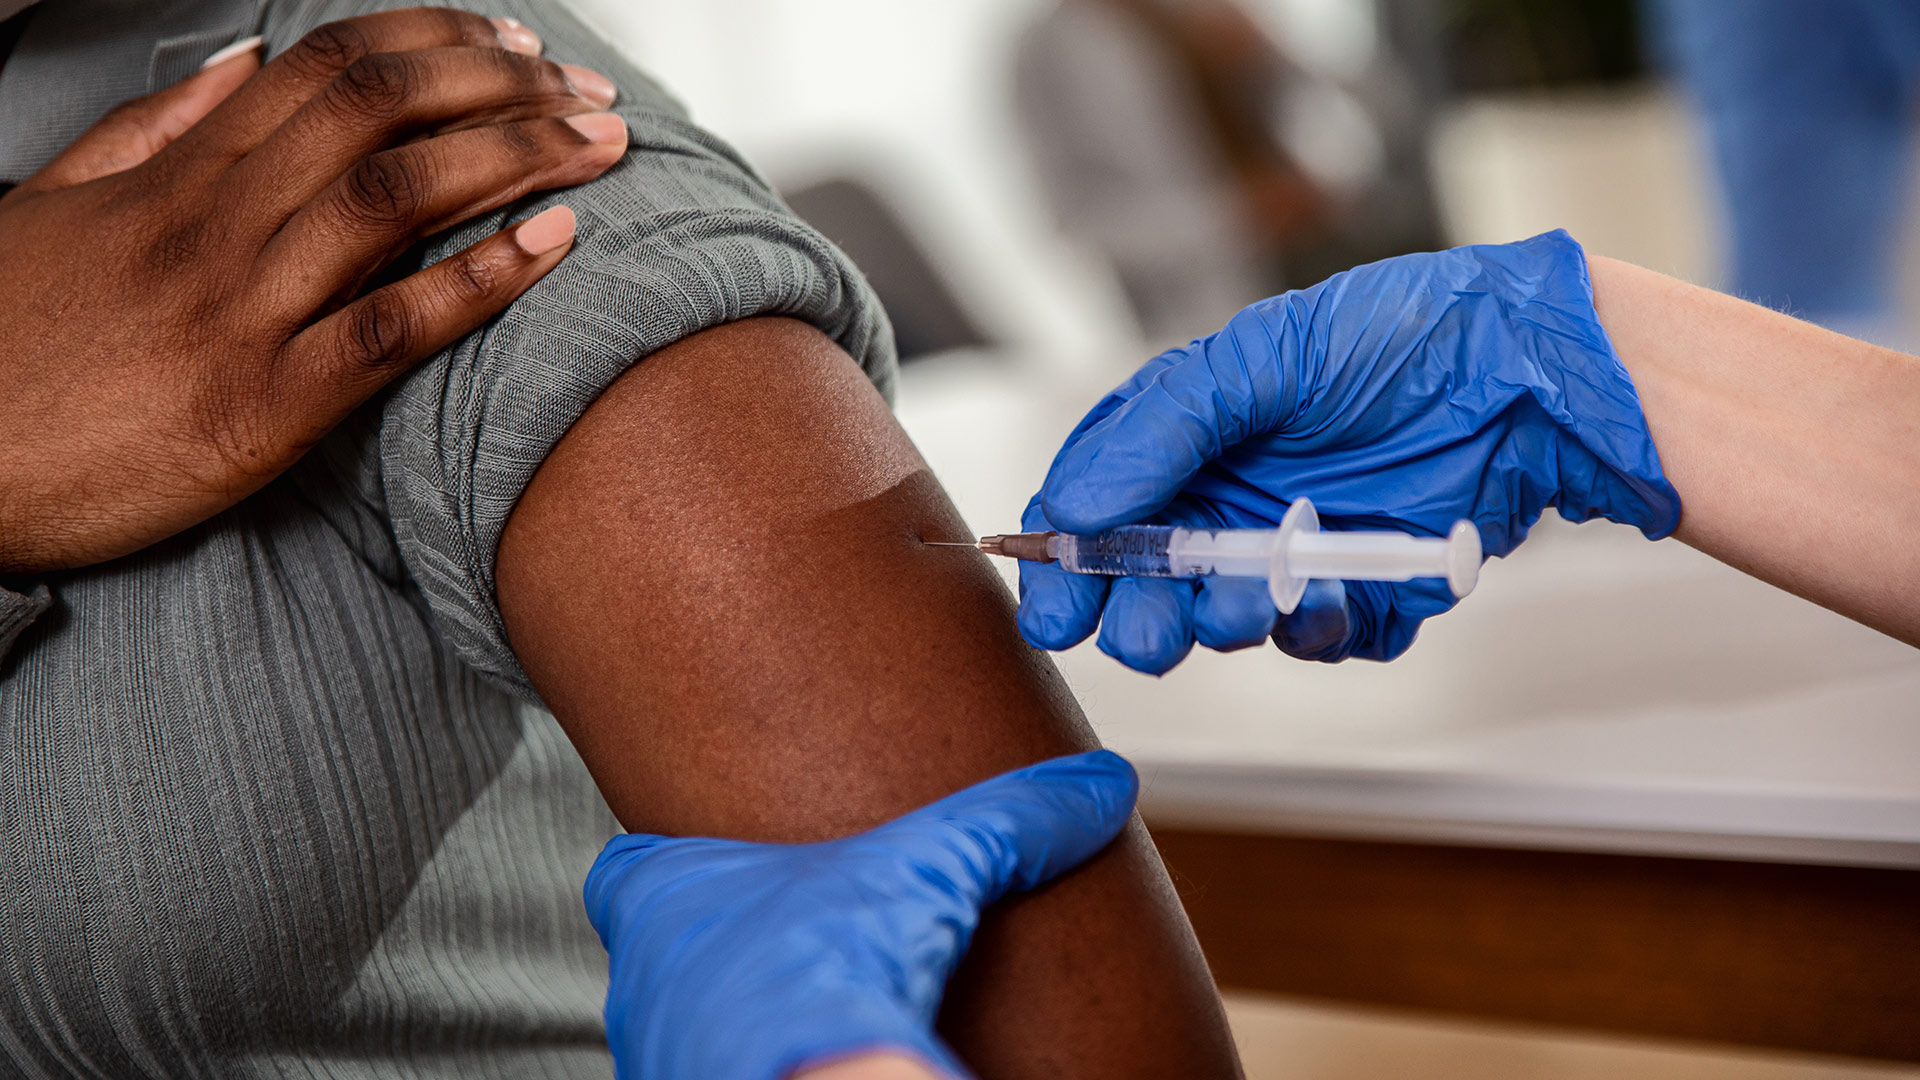 A person receives an injection in their arm